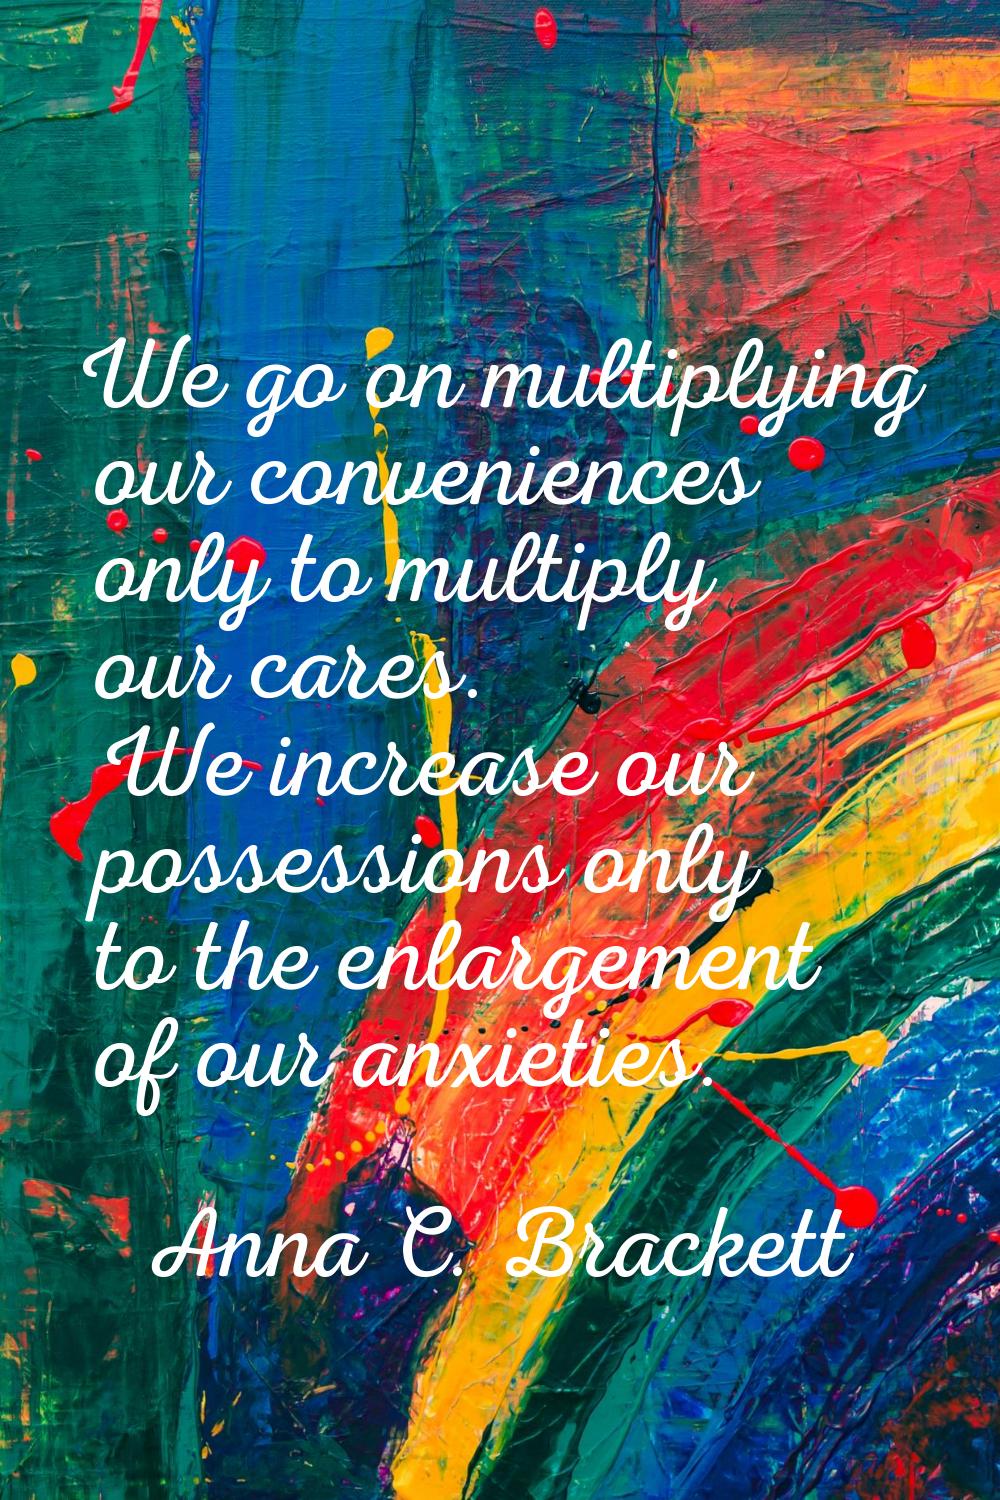 We go on multiplying our conveniences only to multiply our cares. We increase our possessions only 